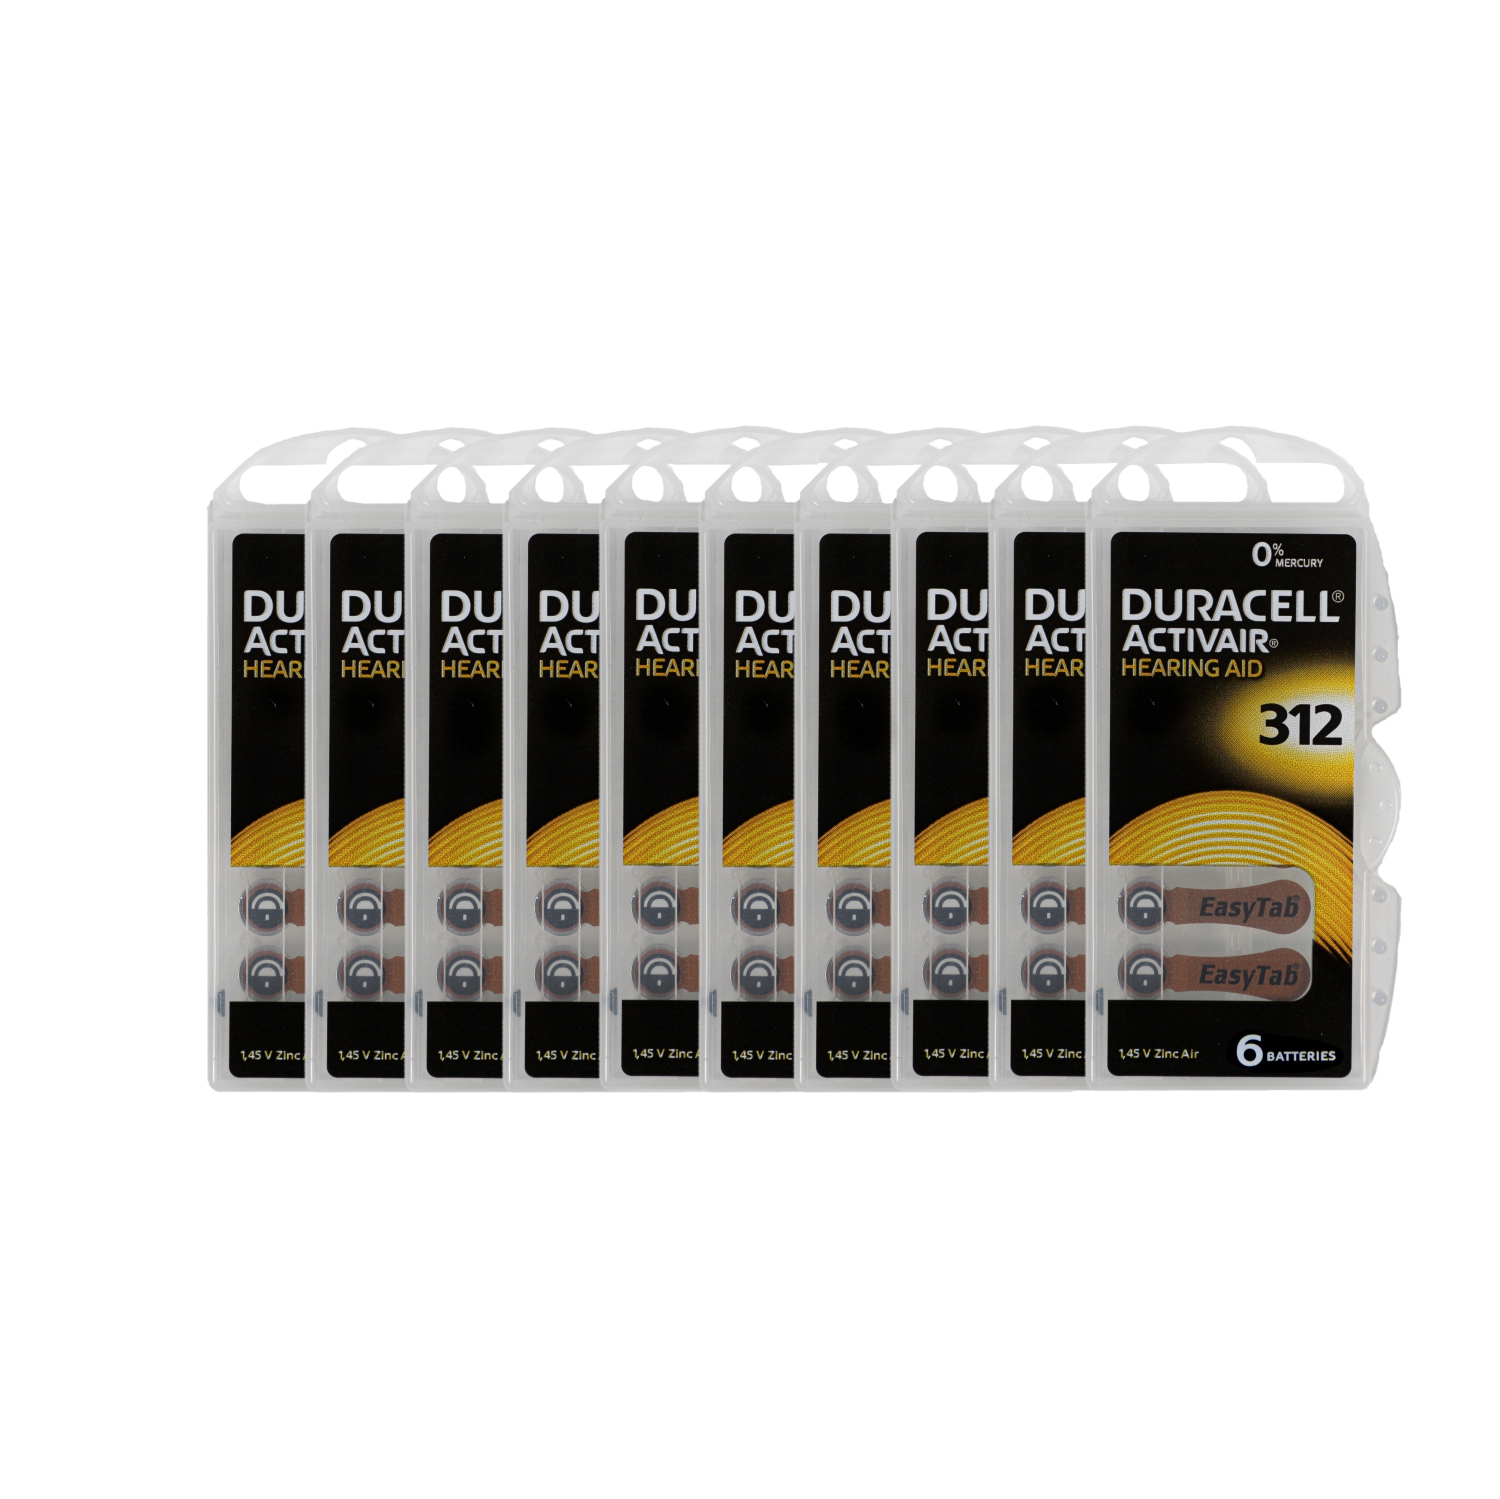 Duracell Activair Size 312 (60 Pack) - Hearing Aid Batteries